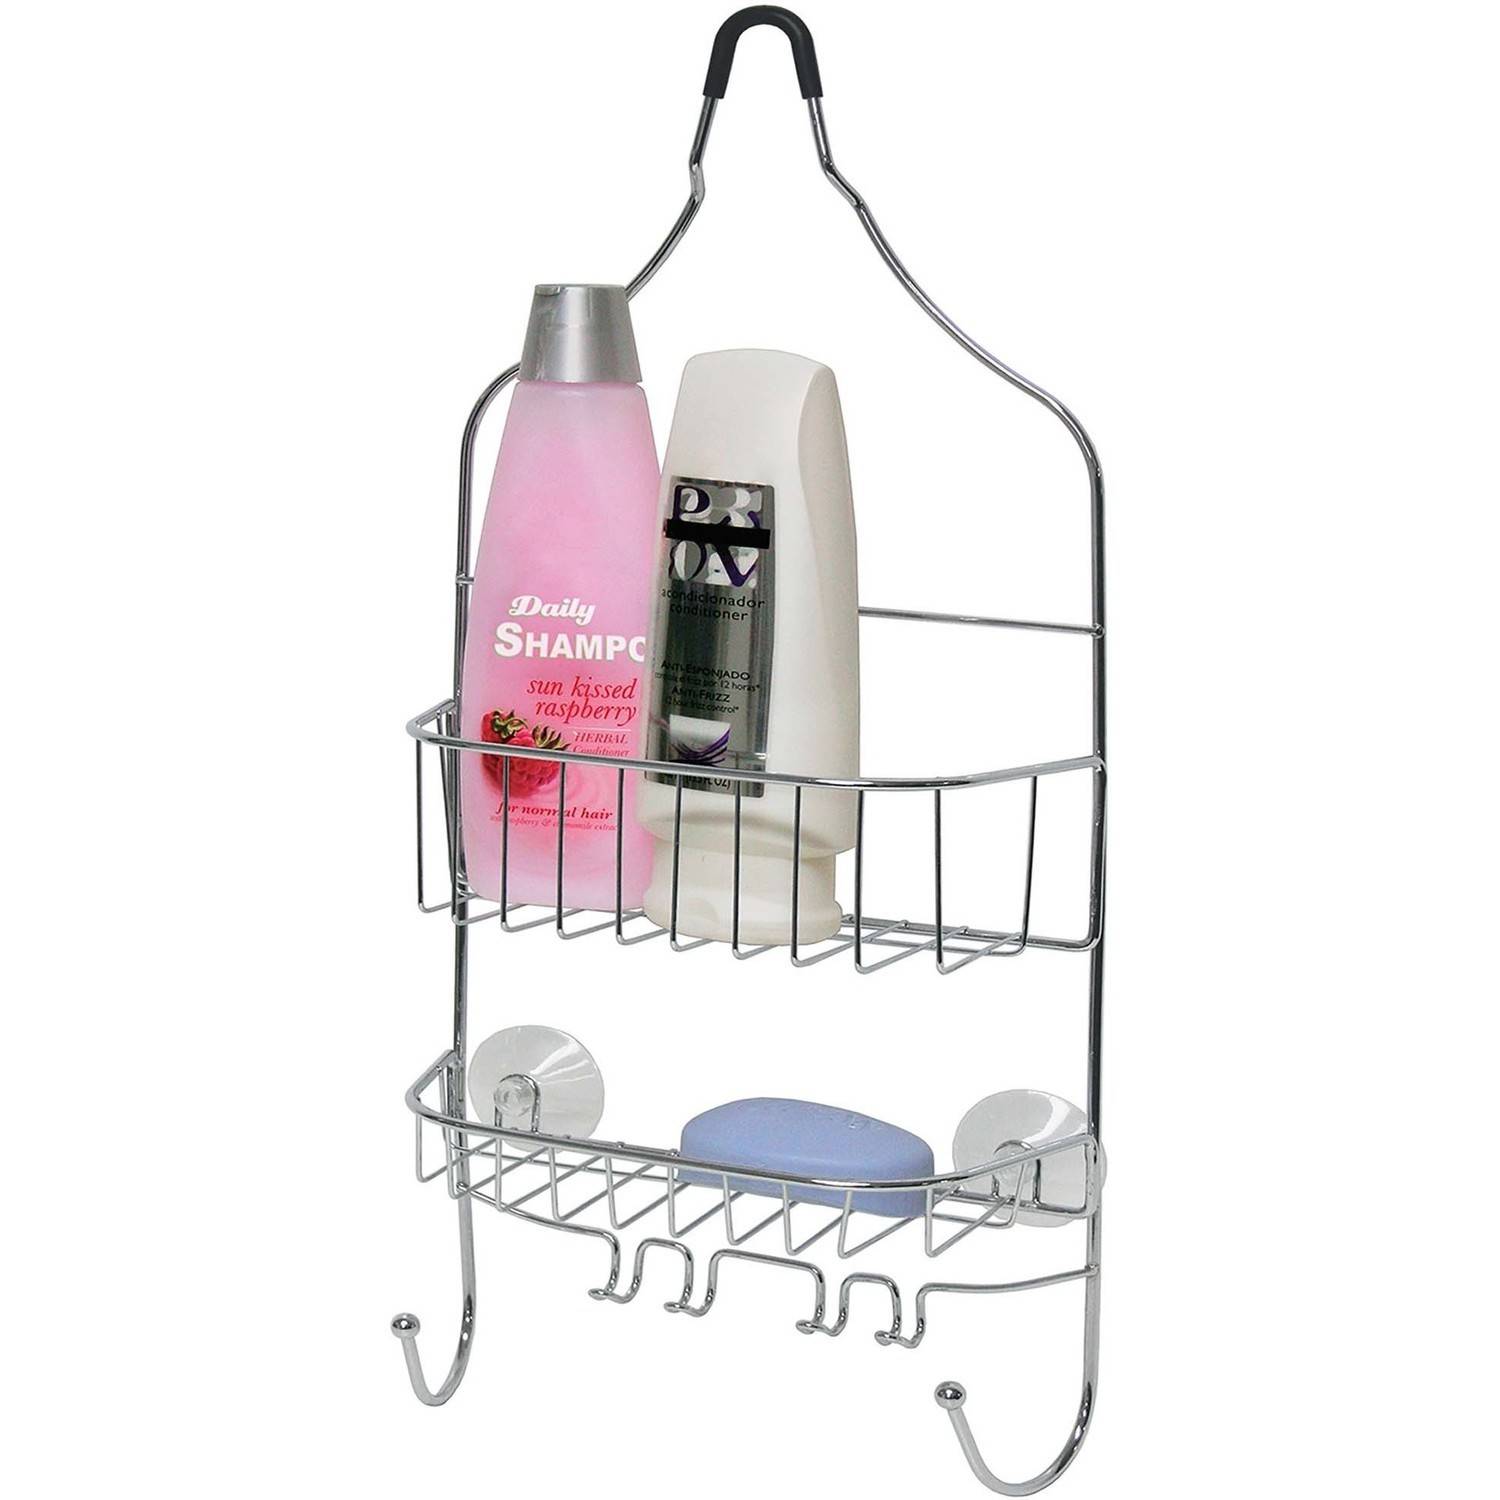 Bath Bliss Contoured Head Design Metal Shower Caddy with 2 Shelves, Chrome - image 3 of 5